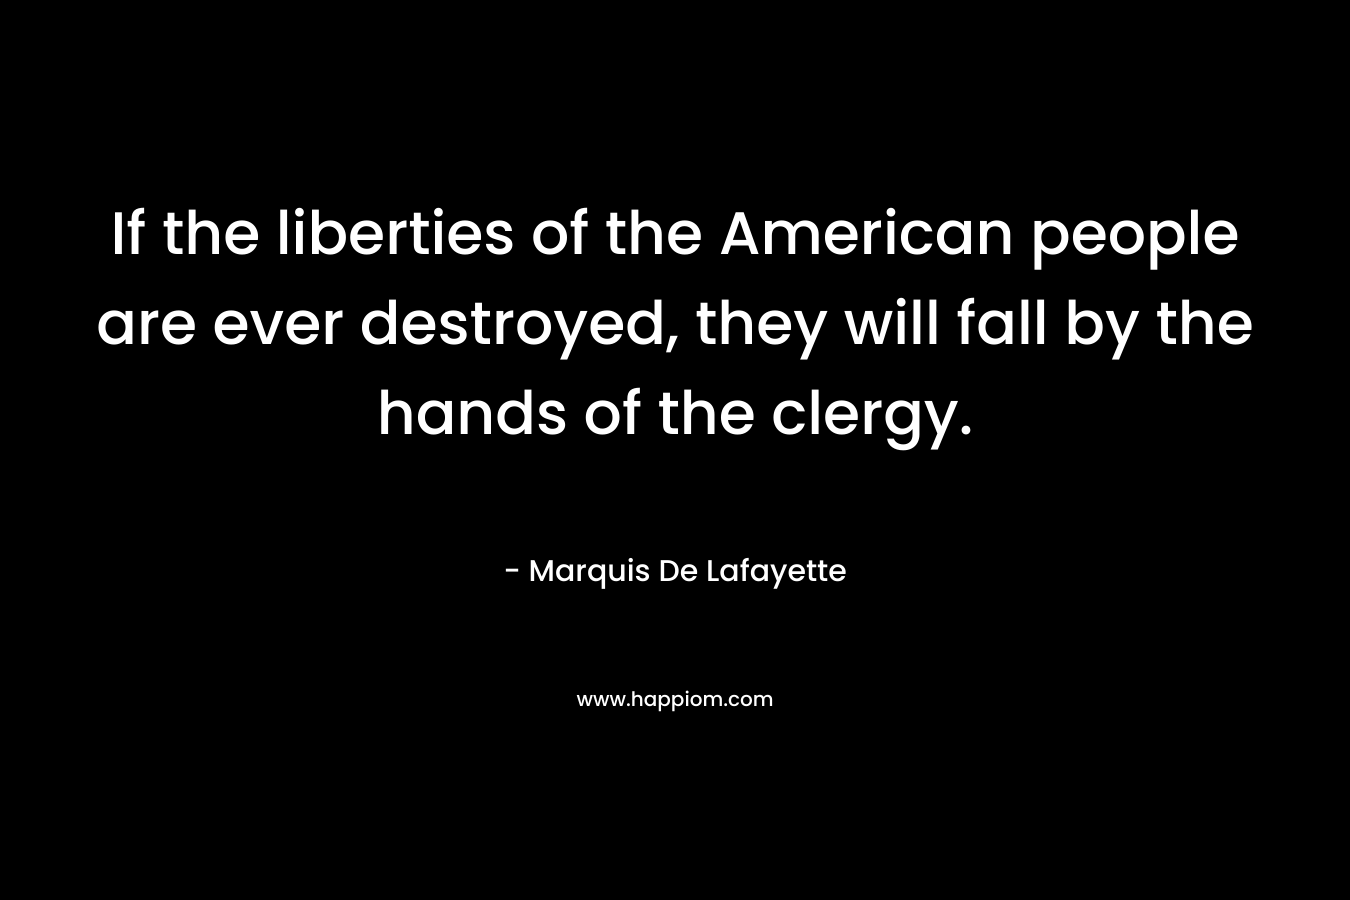 If the liberties of the American people are ever destroyed, they will fall by the hands of the clergy. – Marquis De Lafayette